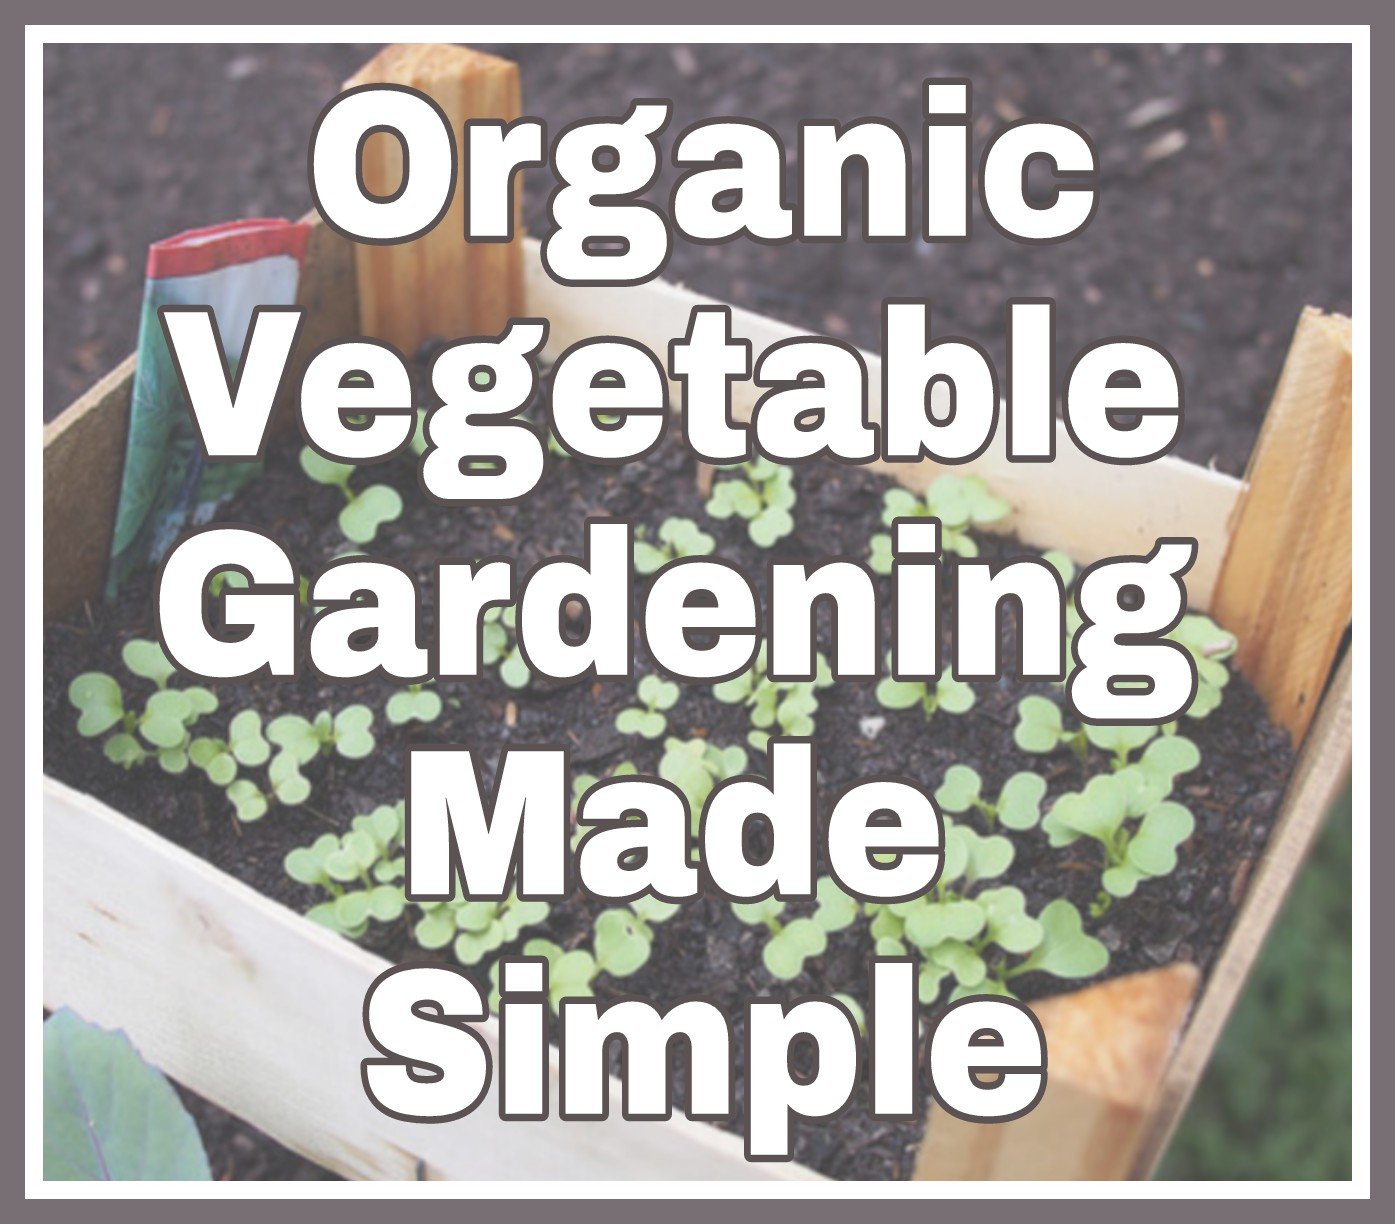  Organic Vegetable Gardening Made Simple title on faded background image